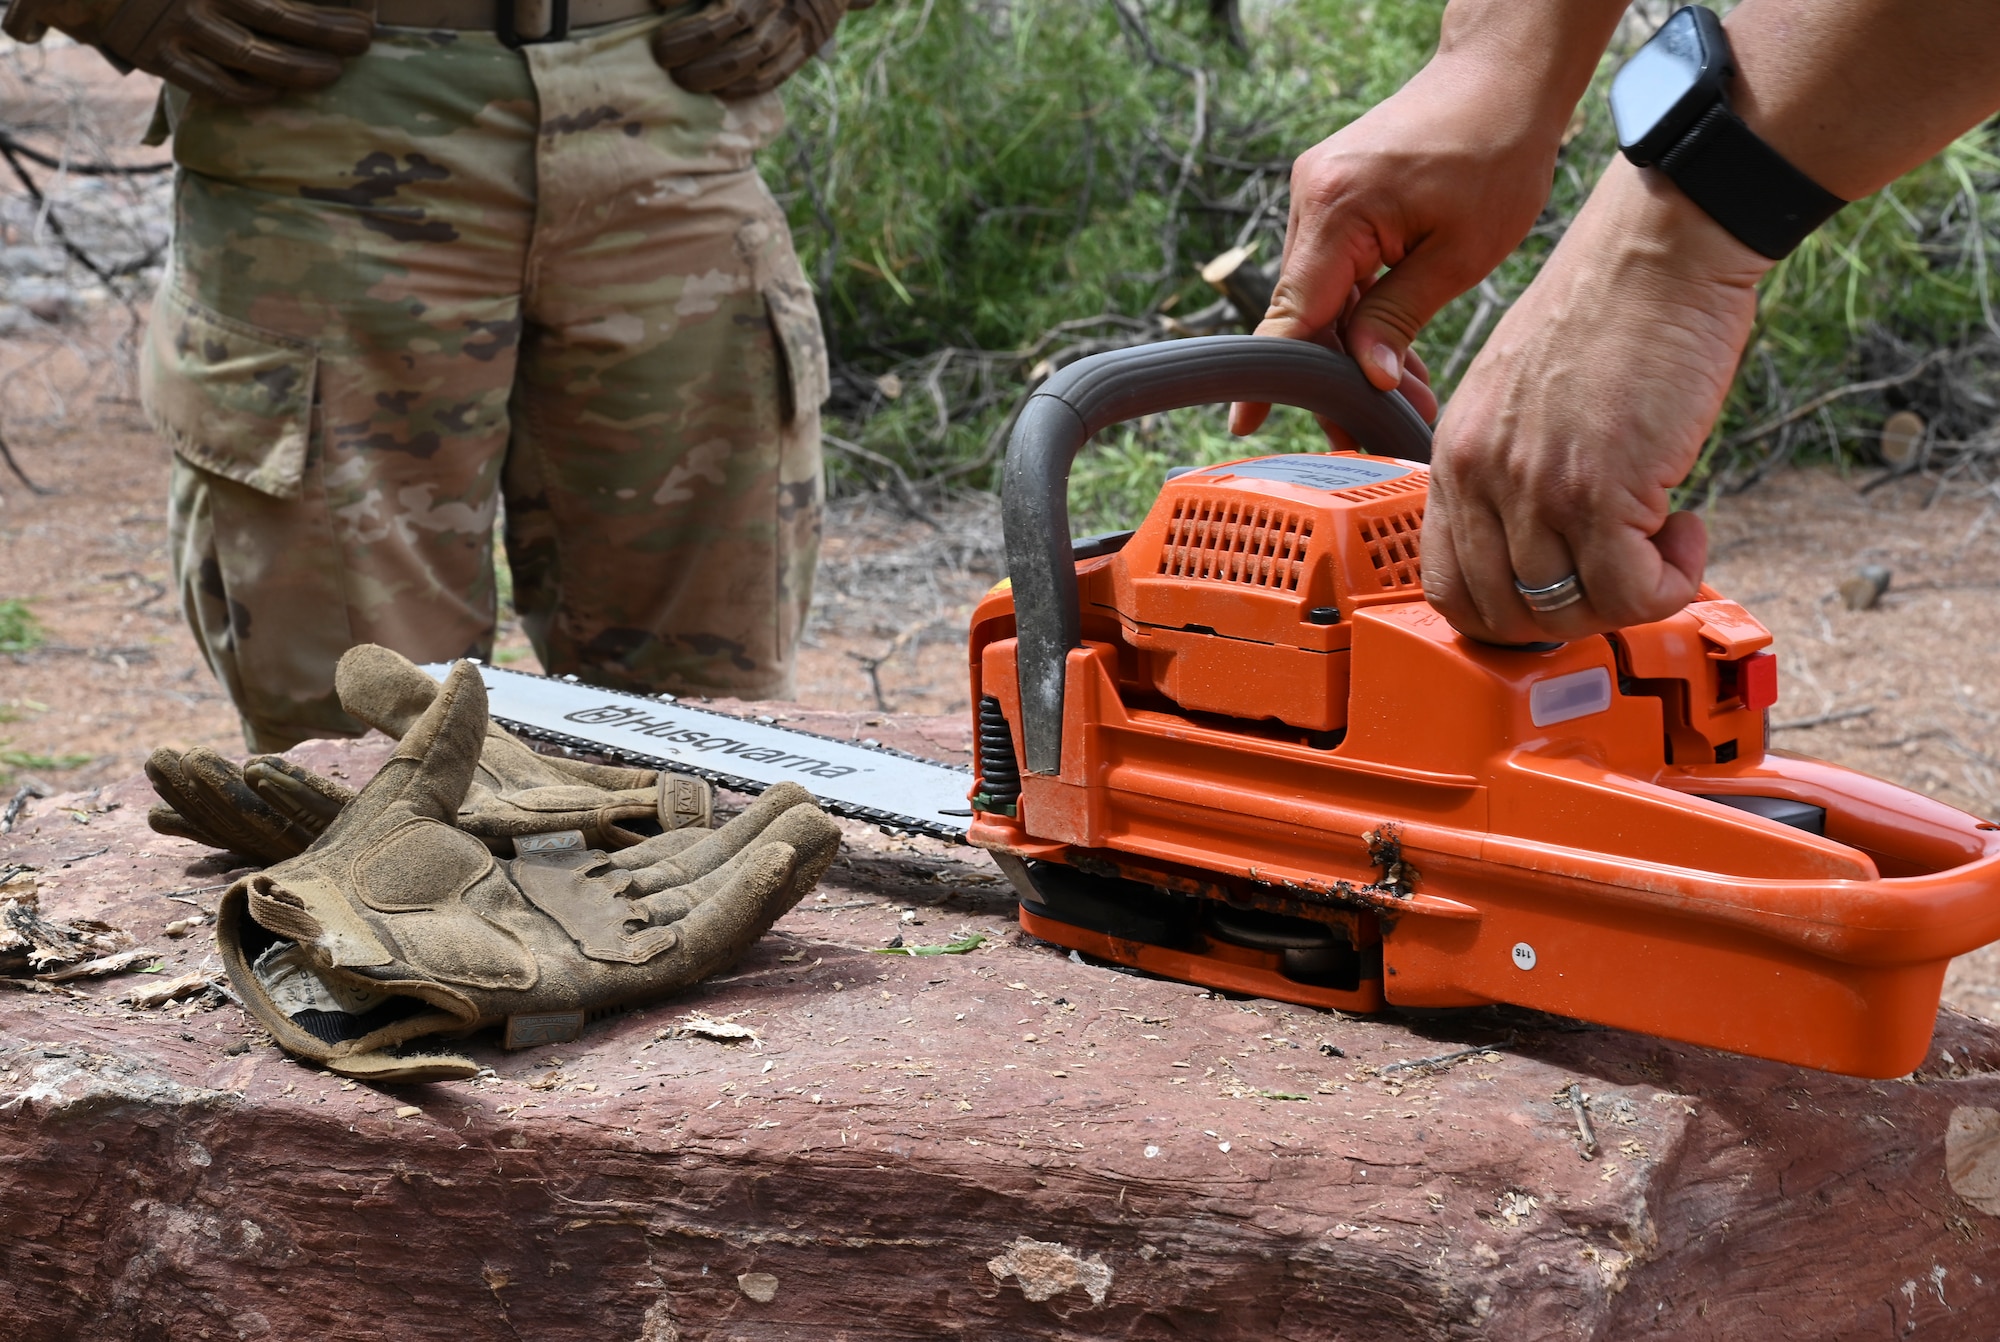 U.S. Air Force Tech. Sgt. Alonzo Marquez, 49th Civil Engineer Squadron pavements and construction equipment noncommissioned officer in charge, prepares chainsaw to remove debris from fallen tree at Holloman Air Force Base, New Mexico, June 29, 2023. The 49th CES “Dirt Boyz” Airmen are responsible for maintaining Holloman’s infrastructure by using a variety of tools to complete construction projects. (U.S. Air Force photo by Airman 1st Class Michelle Ferrari)